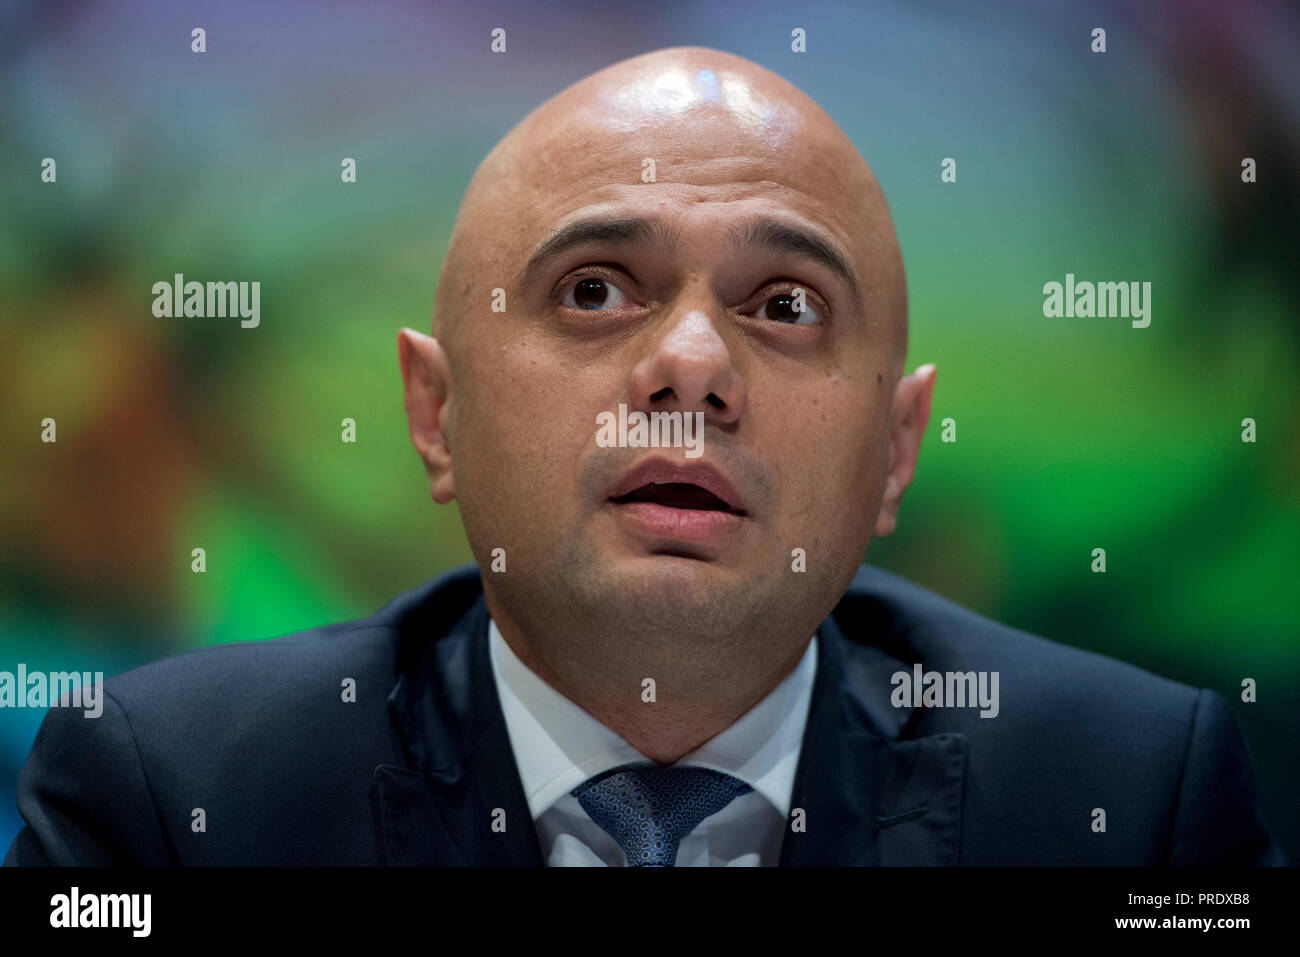 Birmingham, UK. 1st October 2018. Sajid Javid, Secretary of State for the Home Department and Conservative MP for Bromsgrove, speaks during The Spectator and Sky fringe event titled How Open Is Britain?, at the Conservative Party Conference in Birmingham. © Russell Hart/Alamy Live News. Stock Photo